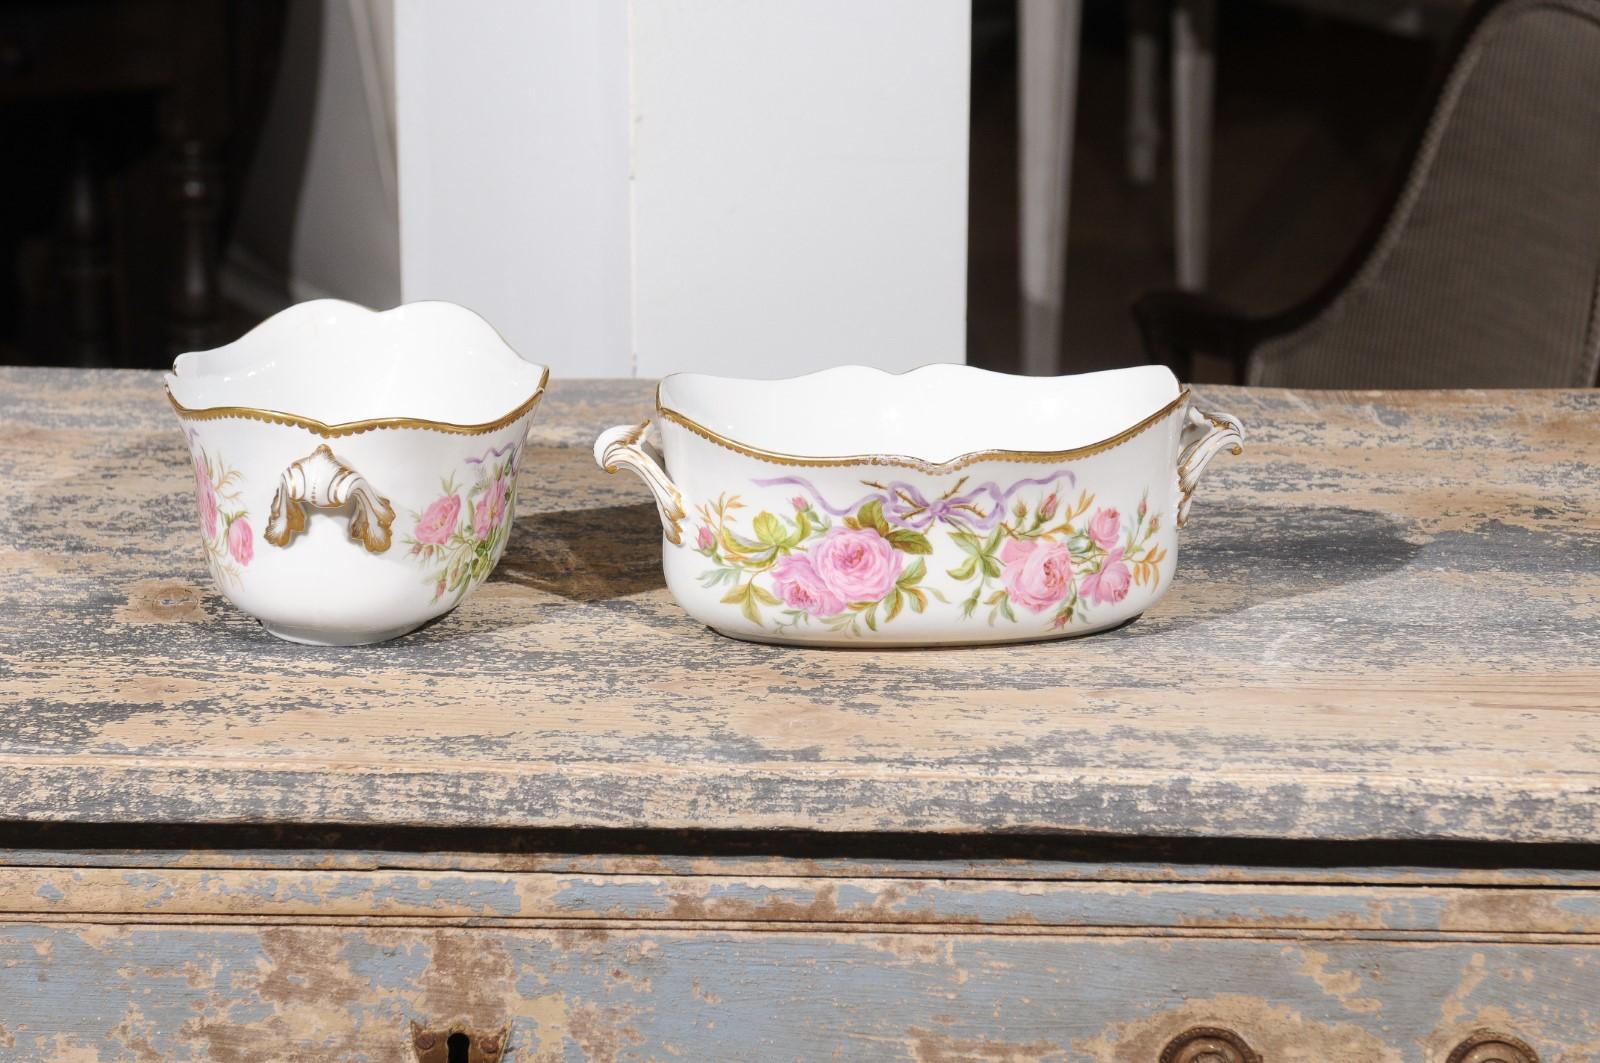 English Porcelain Bowls Depicting Bouquets of Pink Roses with Gilt Accents 4